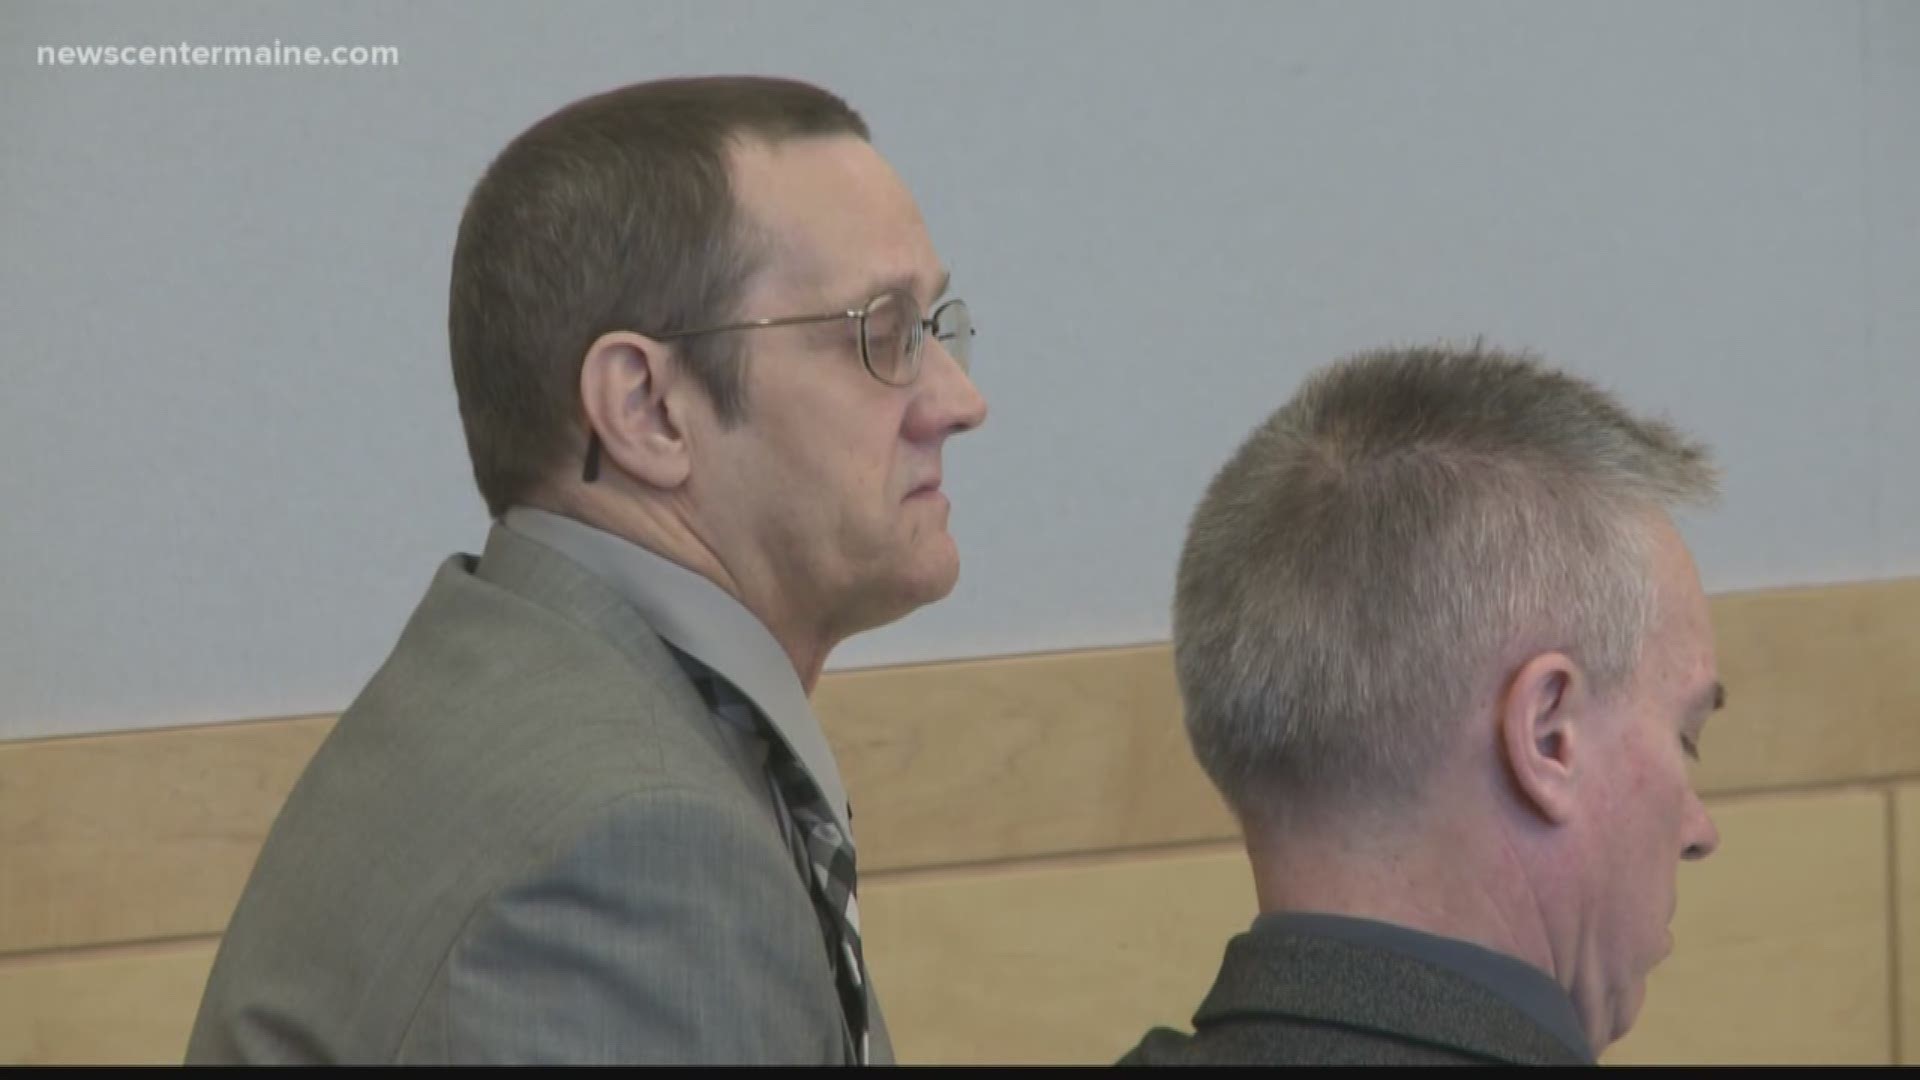 NOW: Fournier sentenced to 45 years in prison